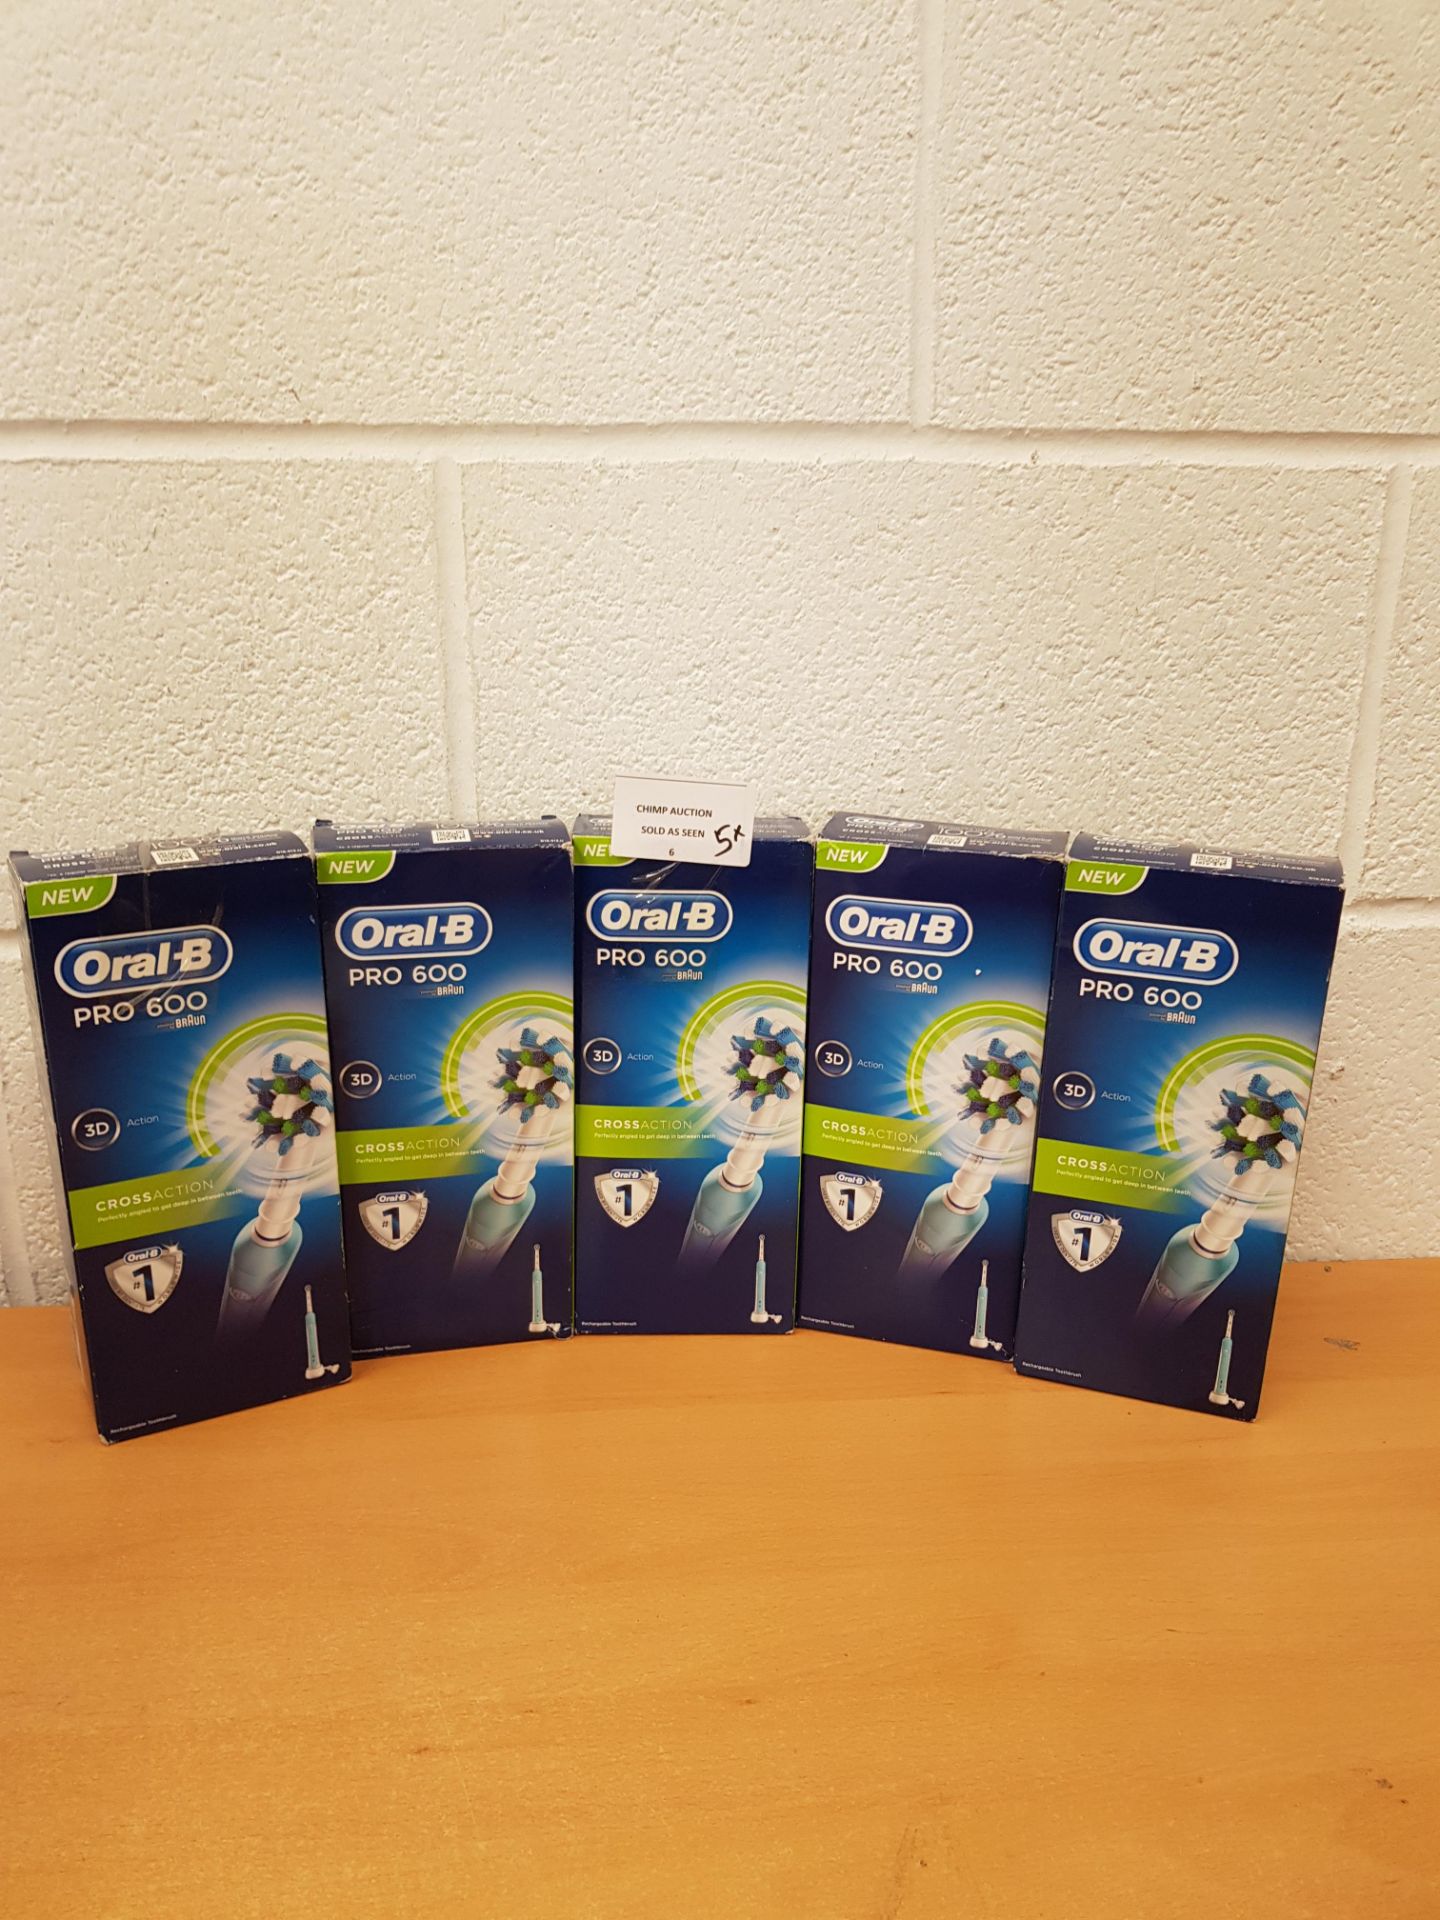 Joblot of 5X Oral-B Braun Pro 600 3D Action electric toothbrushes RRP Value £250.